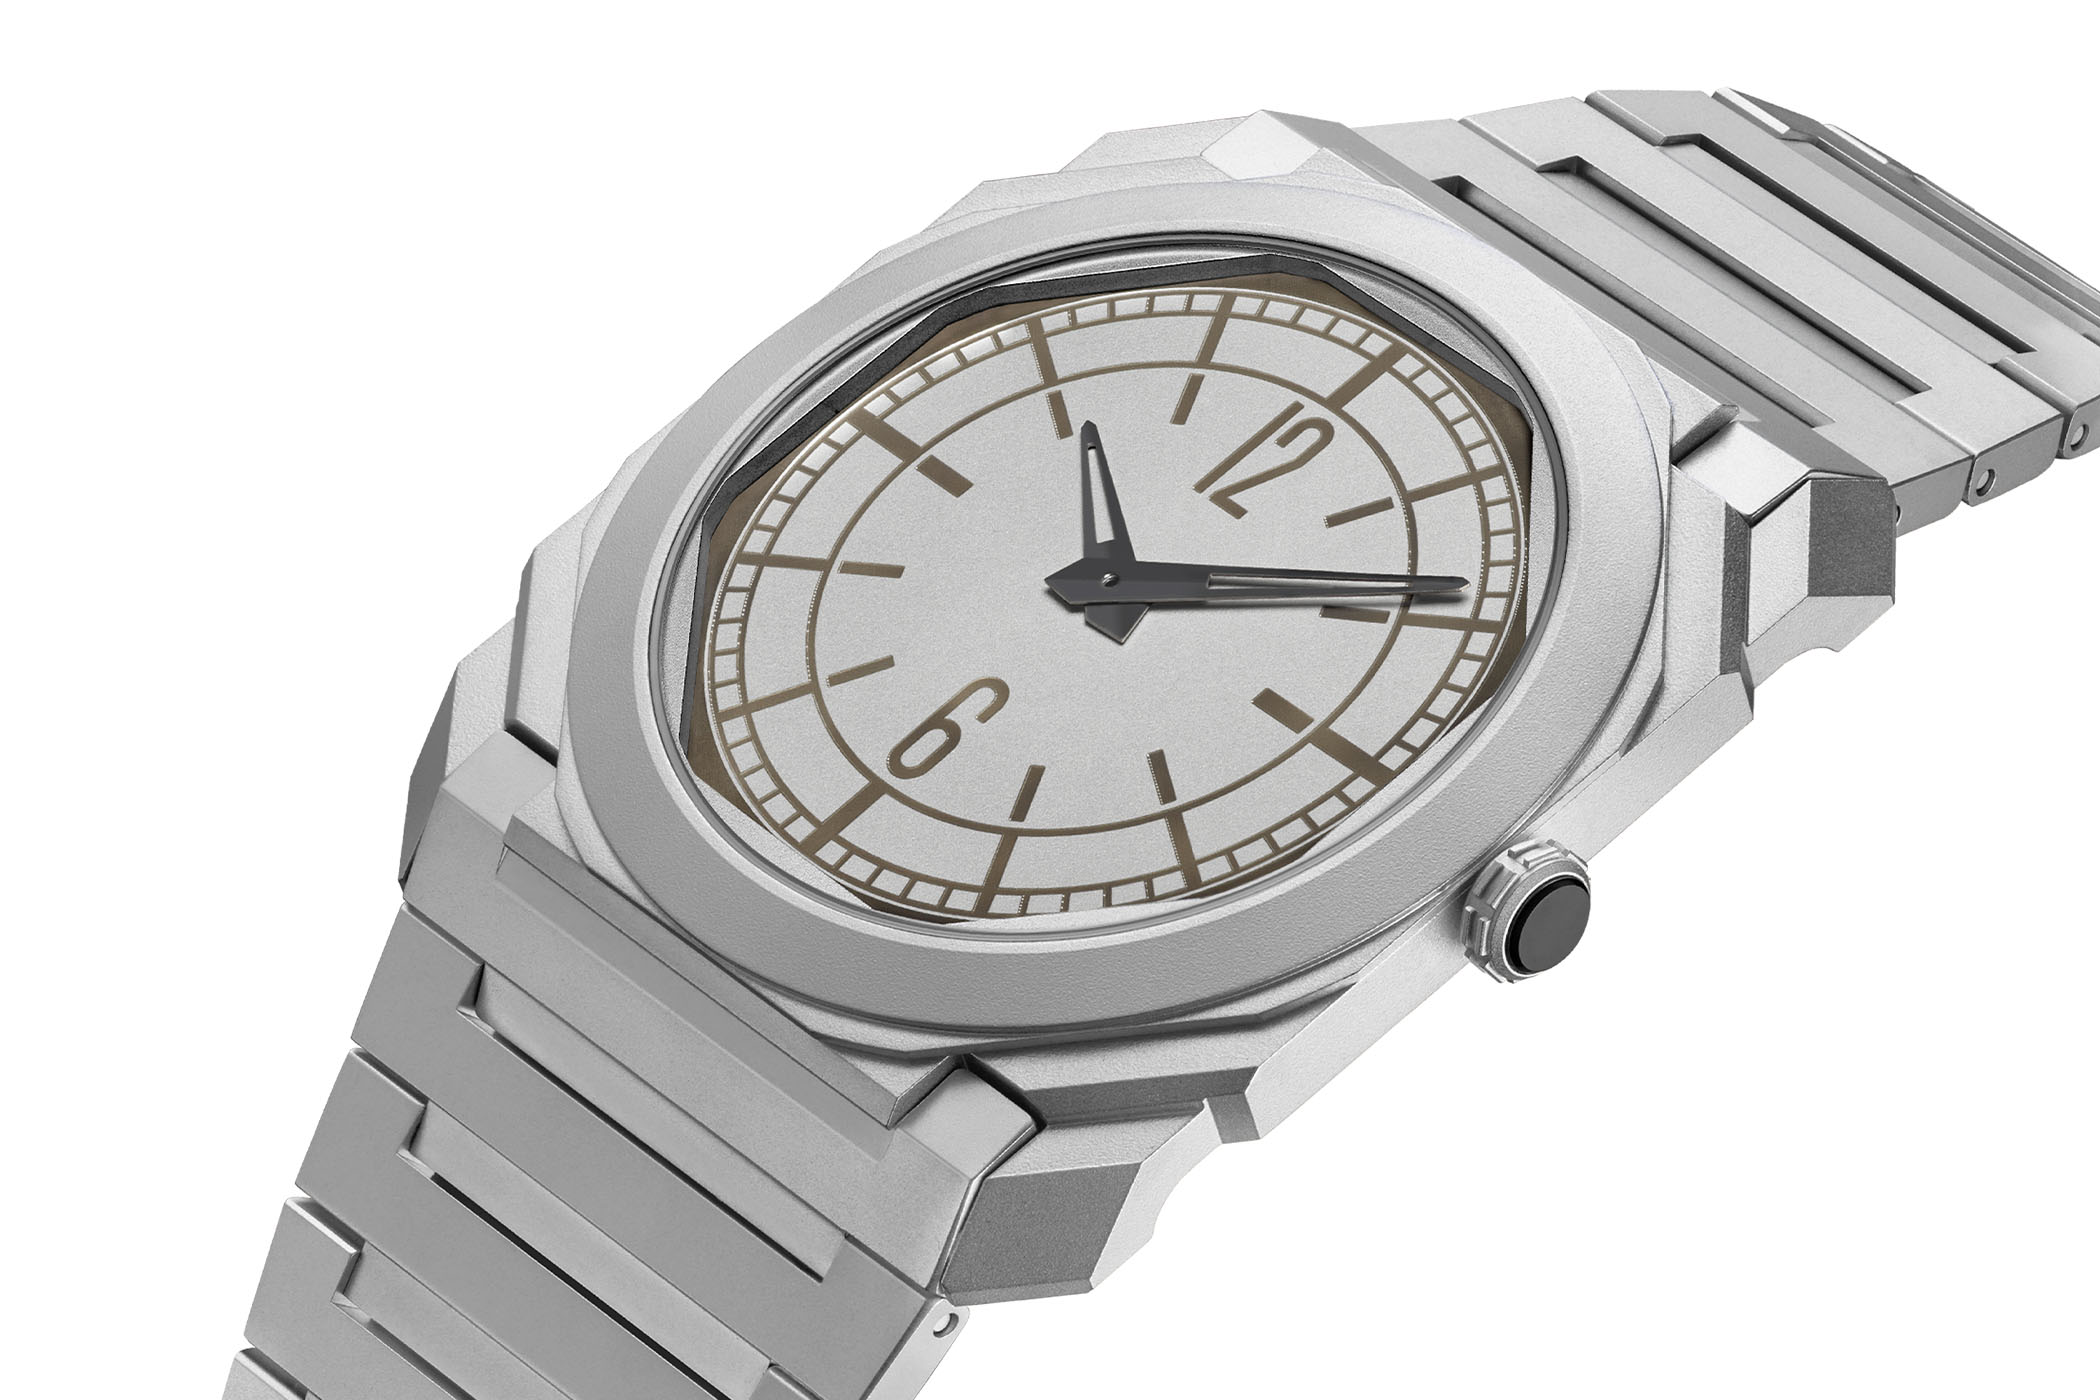 Bulgari Octo Finissimo Special Edition Phillips Watches Sector Dial